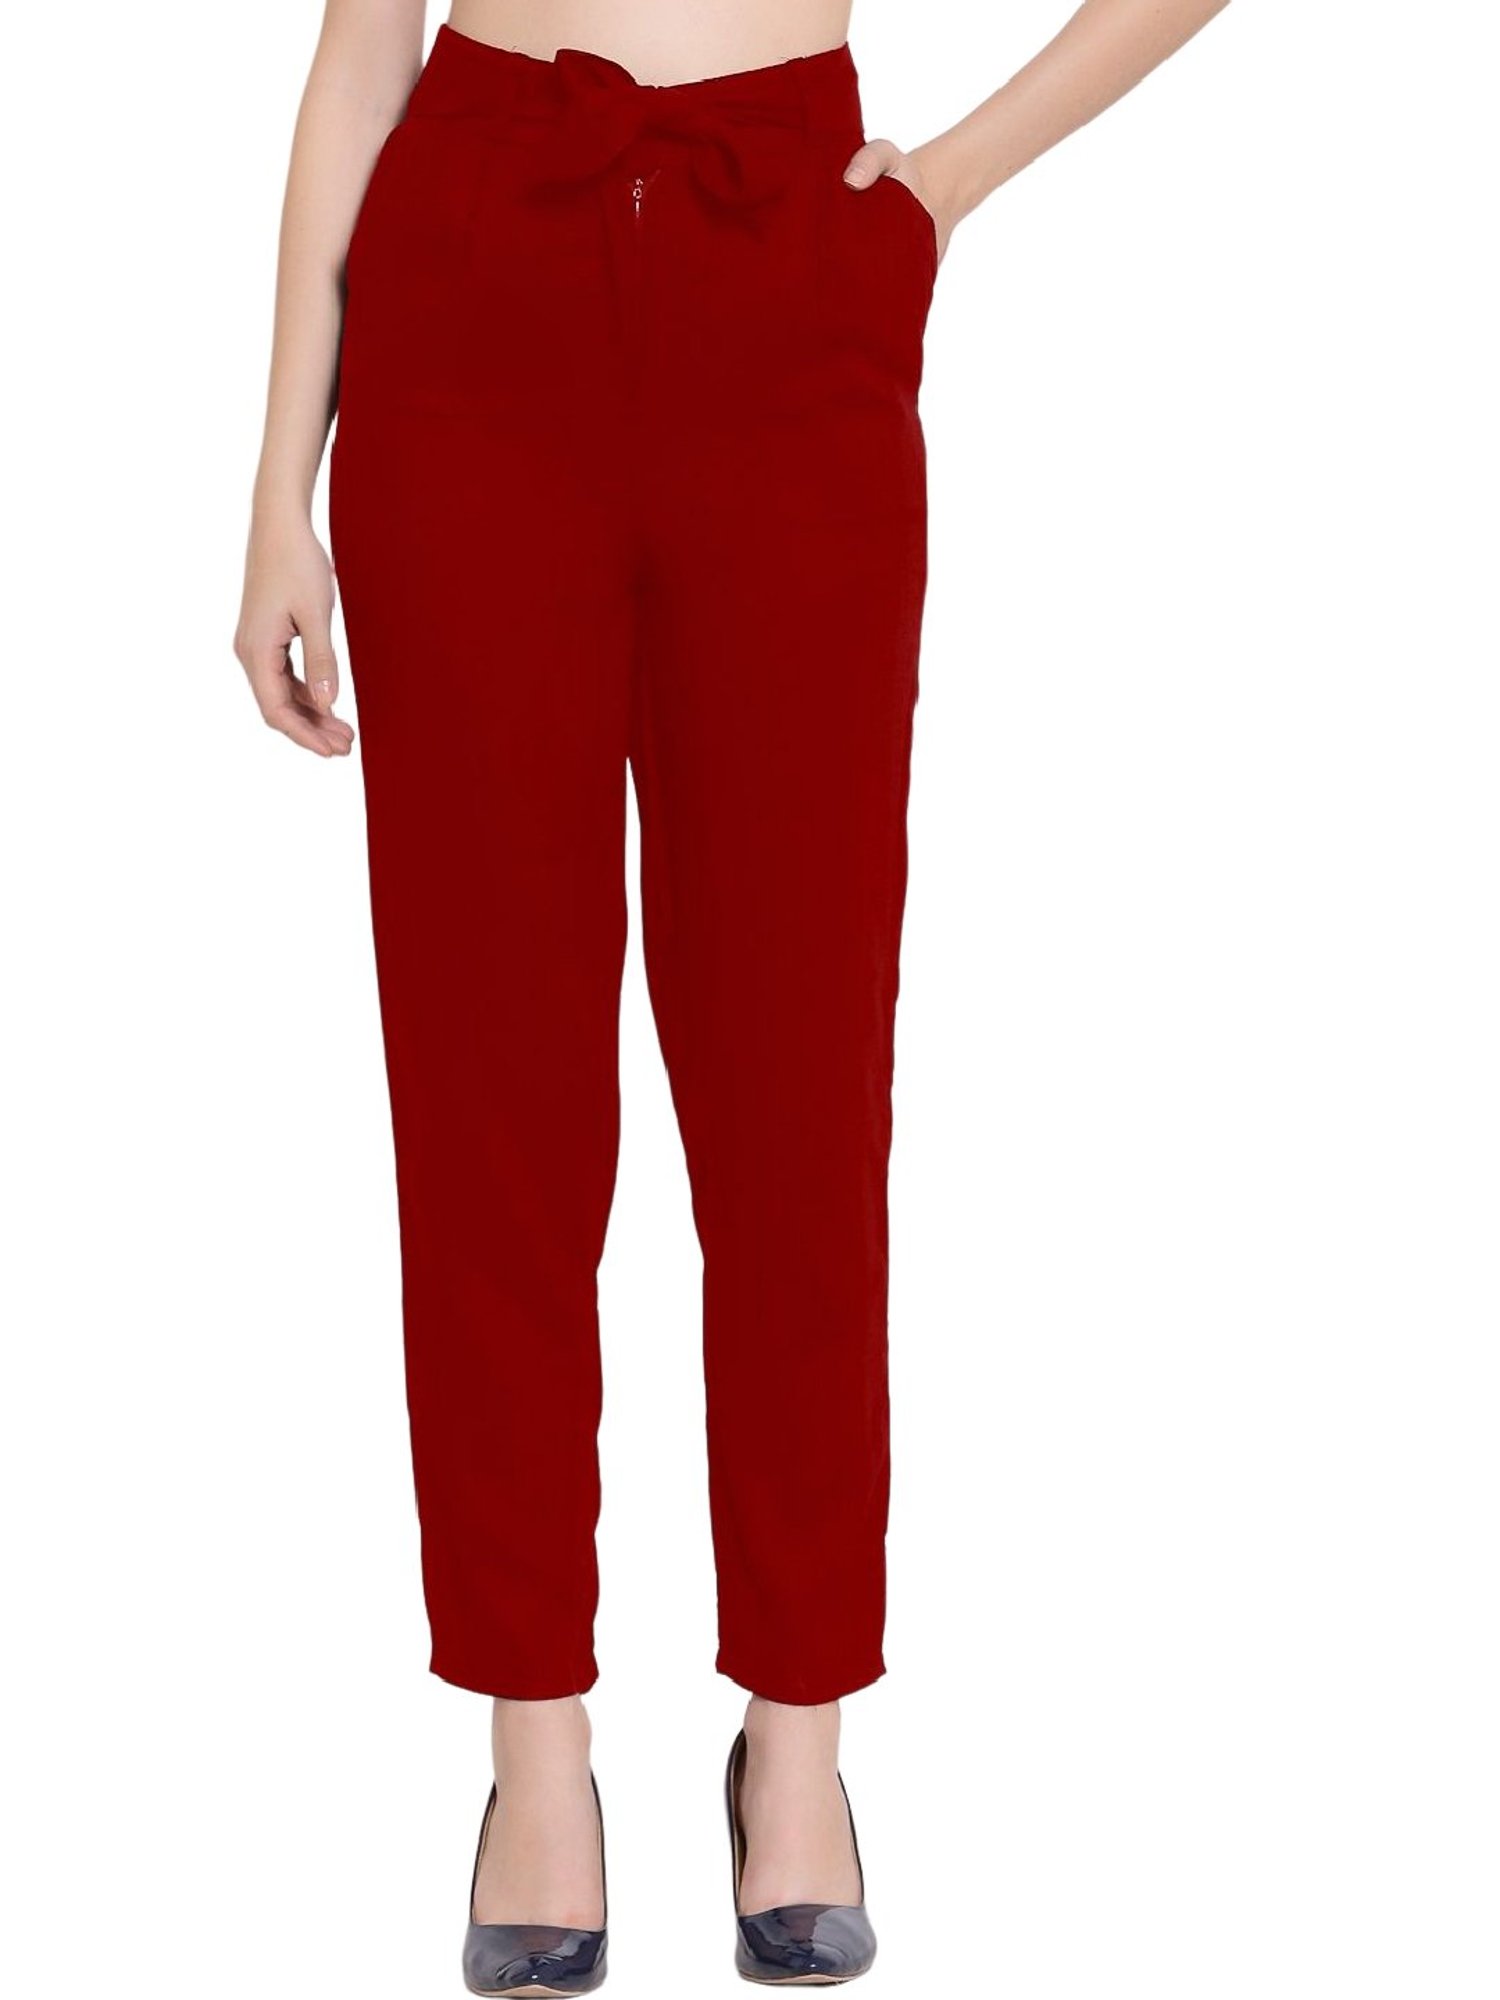 Dollar Missy Women Pack of 2 Straight Fit Solid Cigarette Trousers Maroon  and Sand  Dollarshoppe